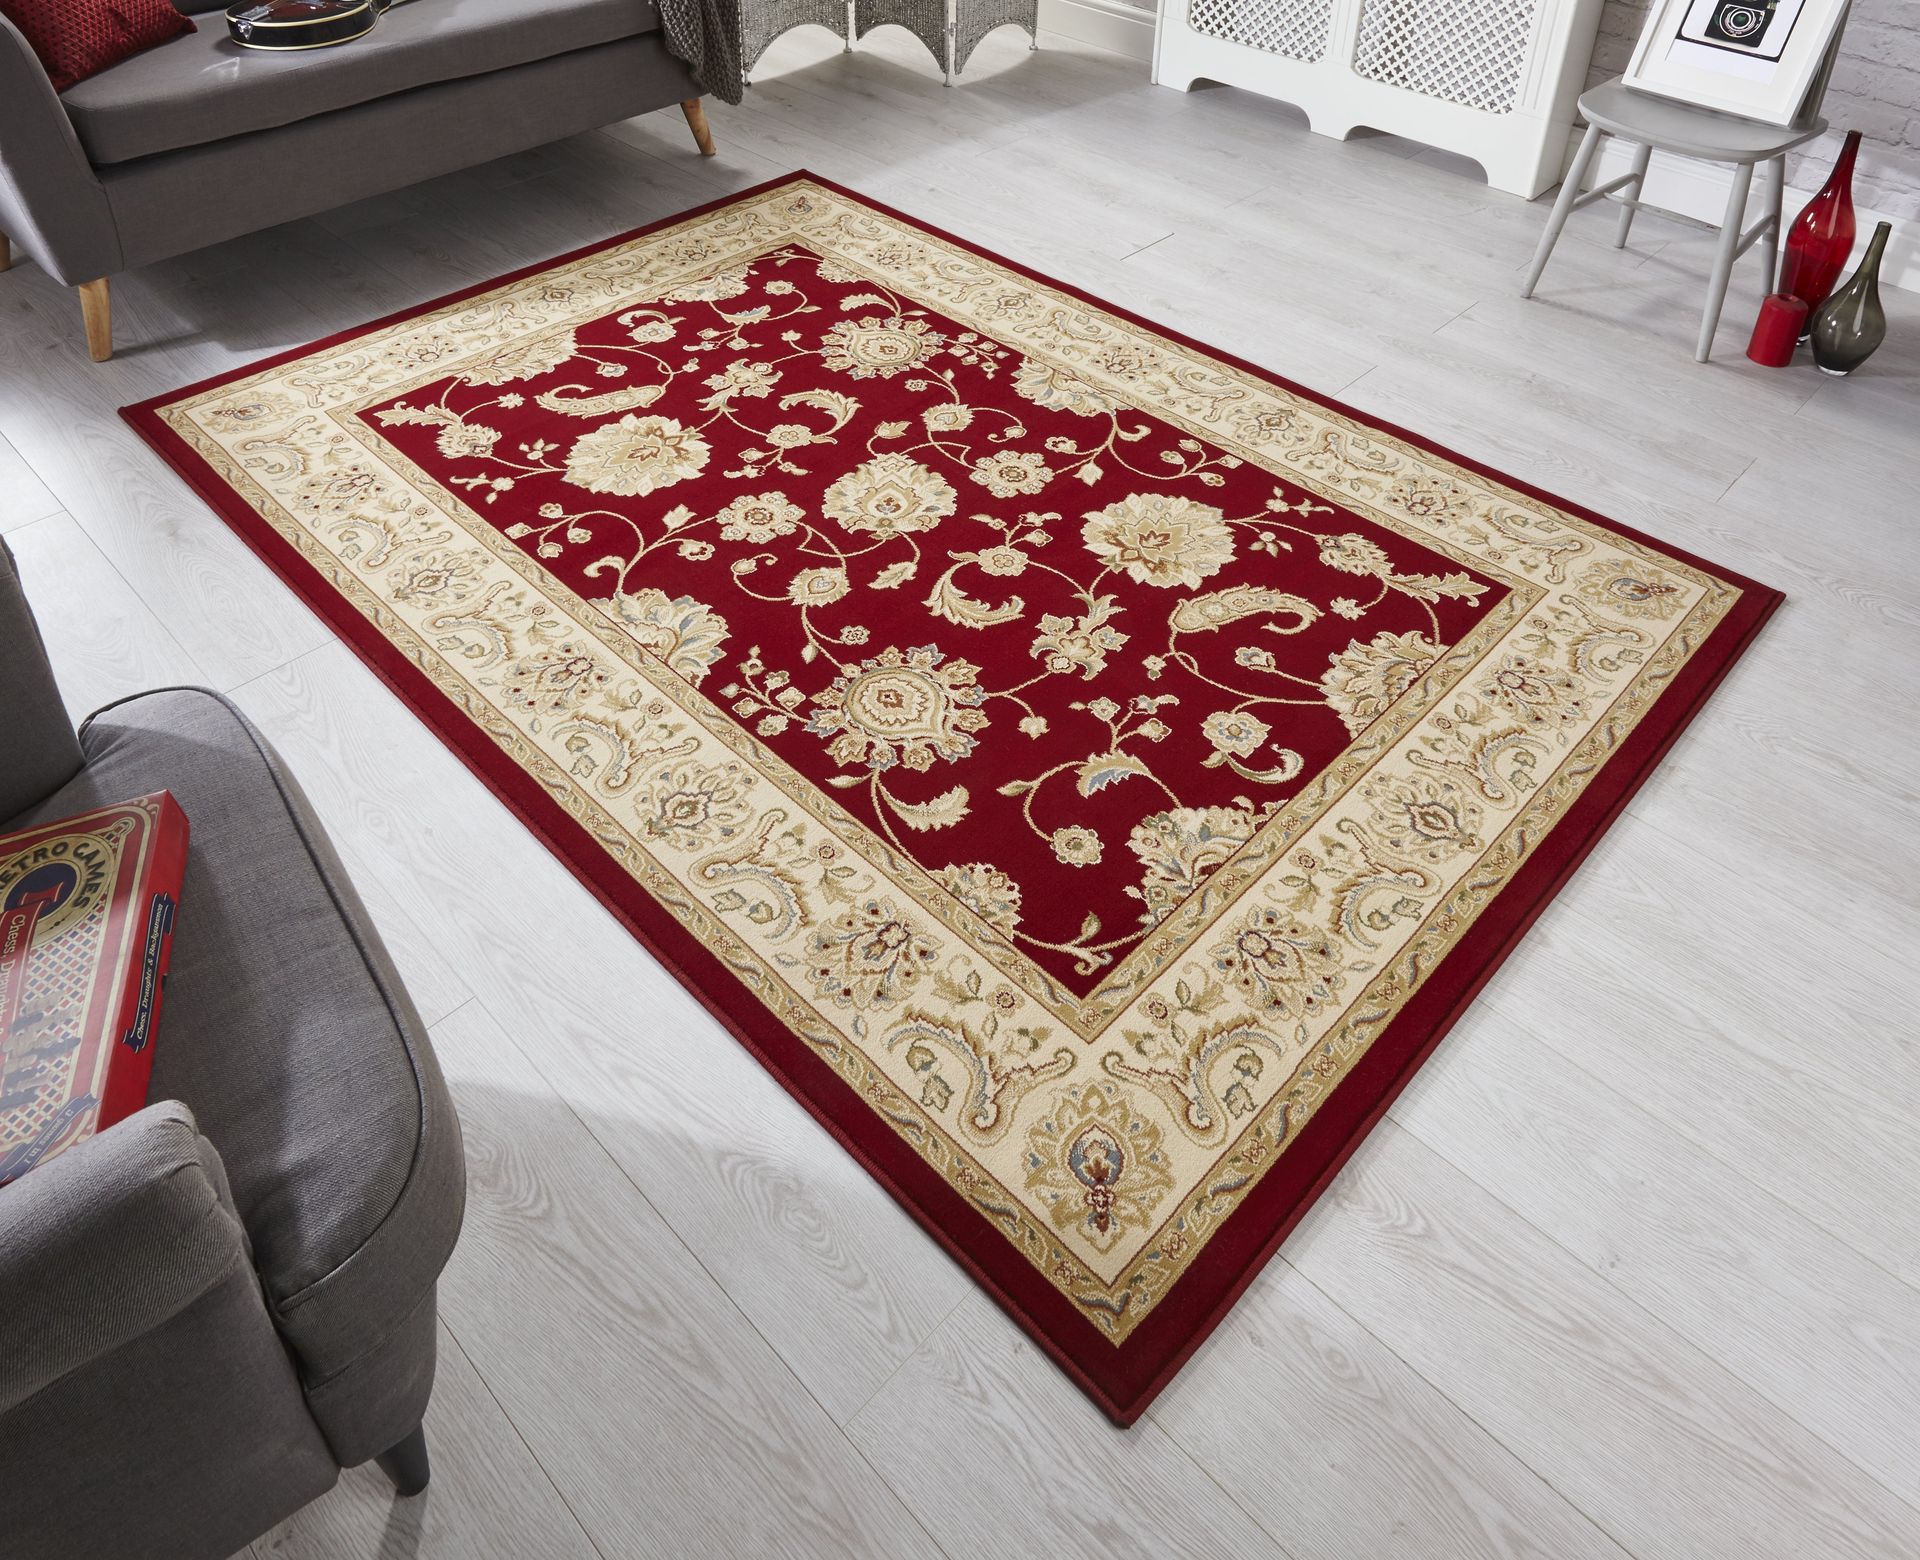 Small rugs